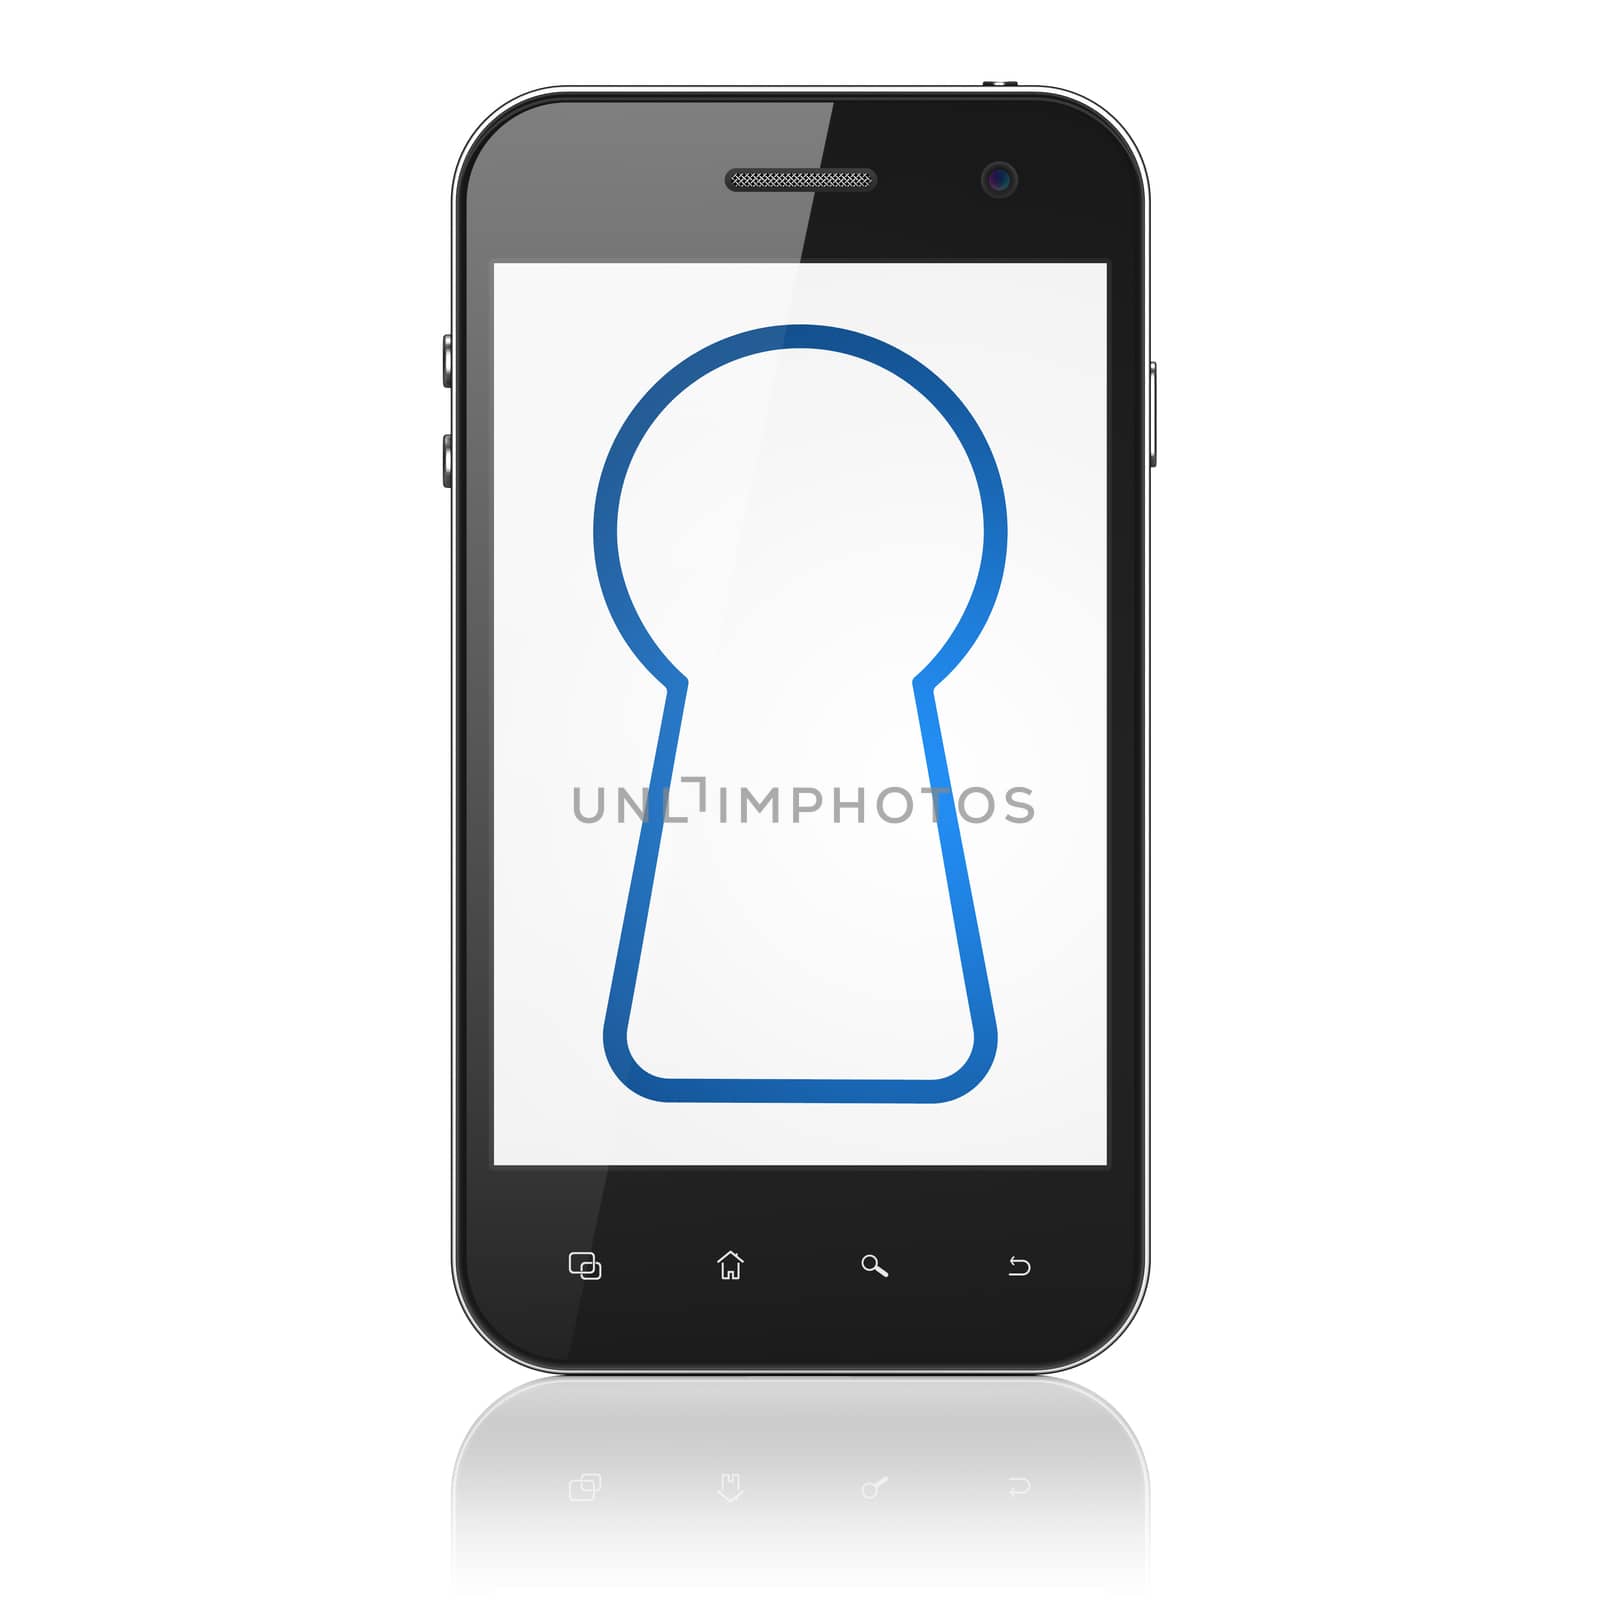 Security concept: smartphone with Keyhole icon on display. Mobile smart phone on White background, cell phone 3d render